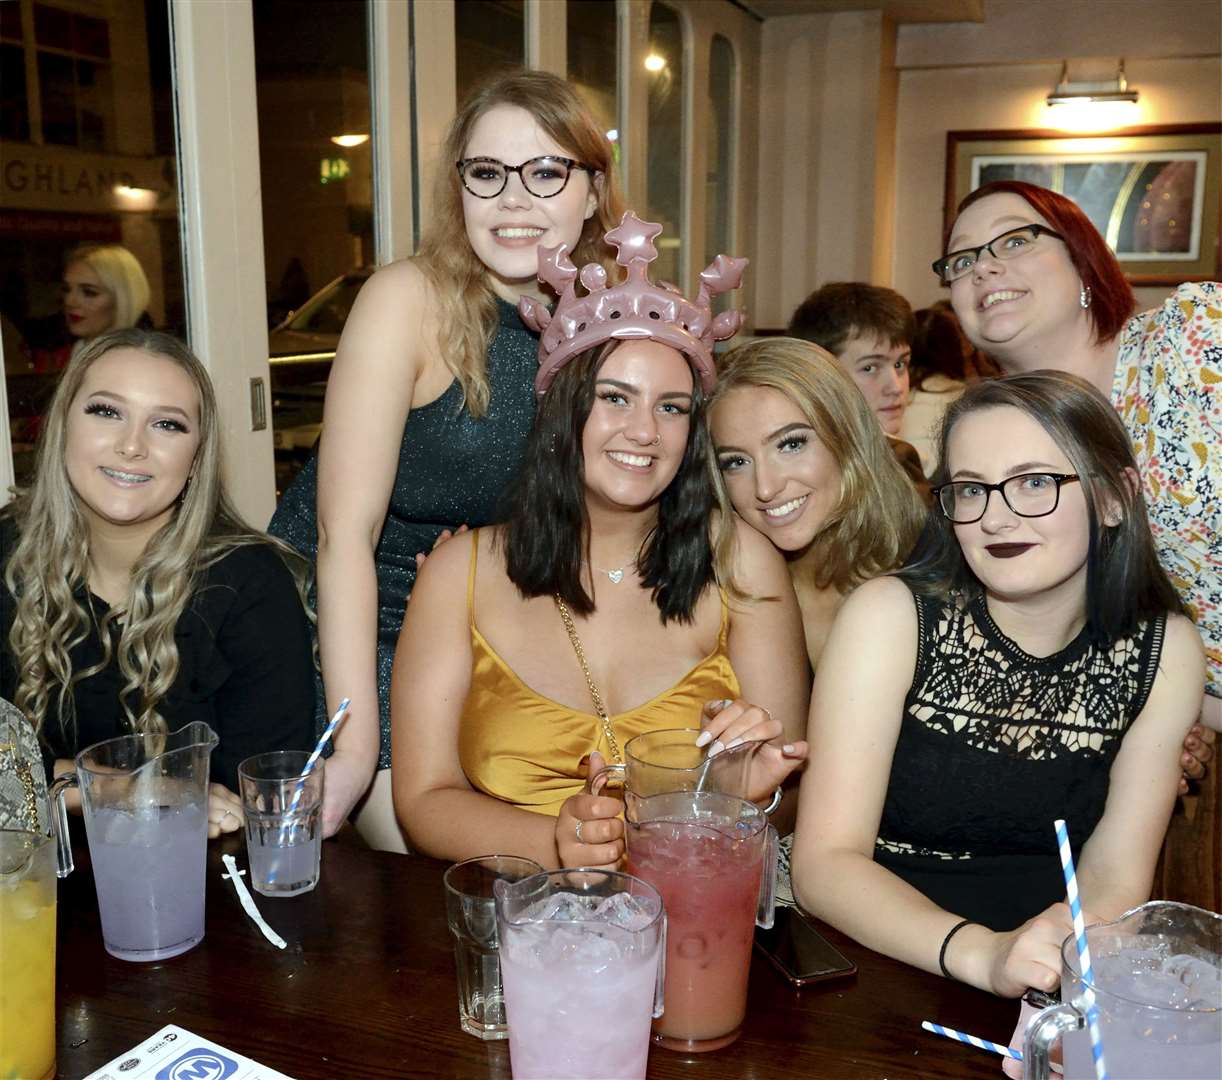 Ciara Latham, Heather Wisely, Erin Lambert who is celebrating her 18th, Elizabeth Giddy and Elly Macpherson.